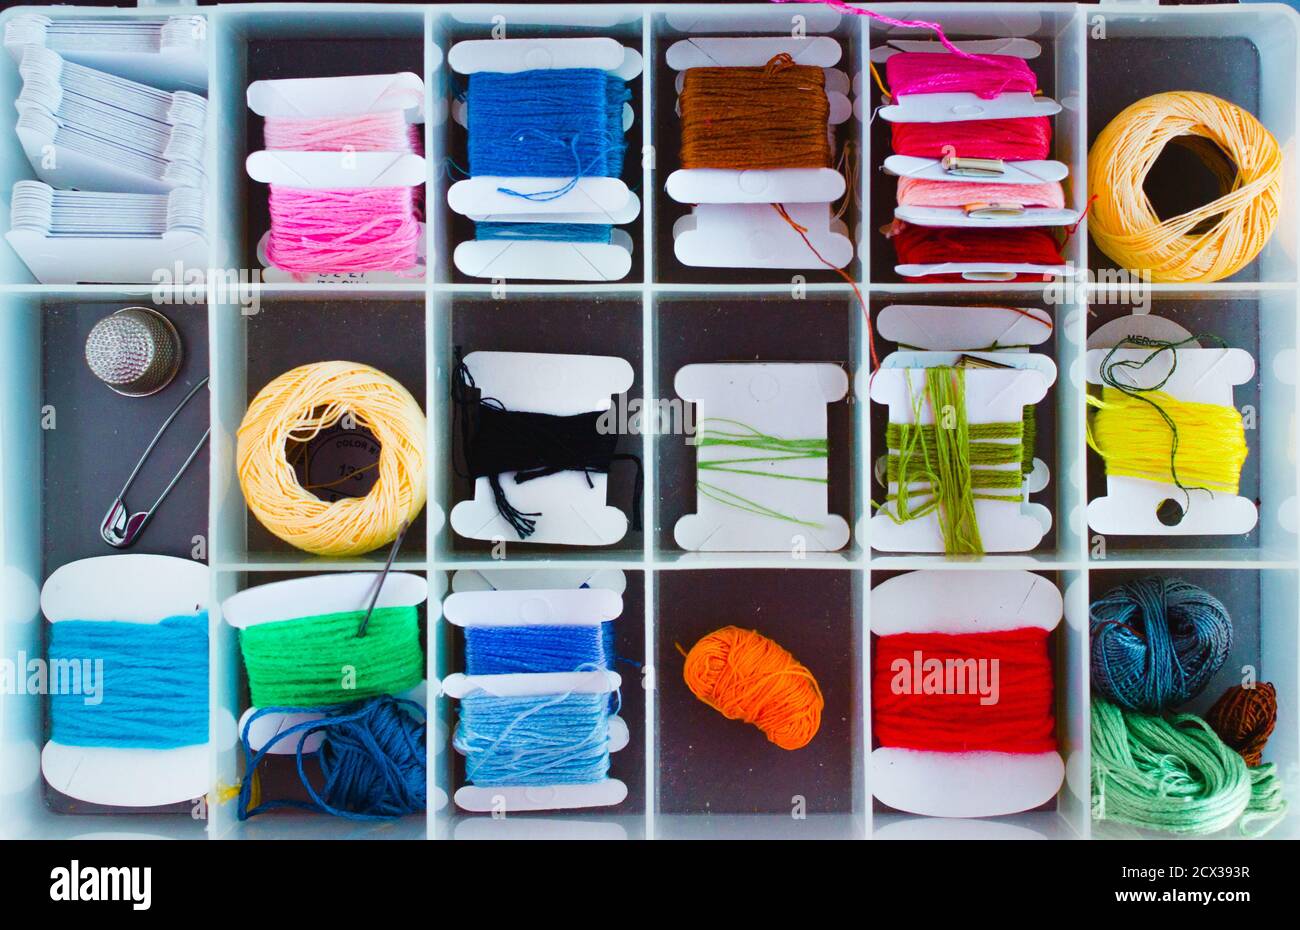 Sewing box with all threads organized Stock Photo